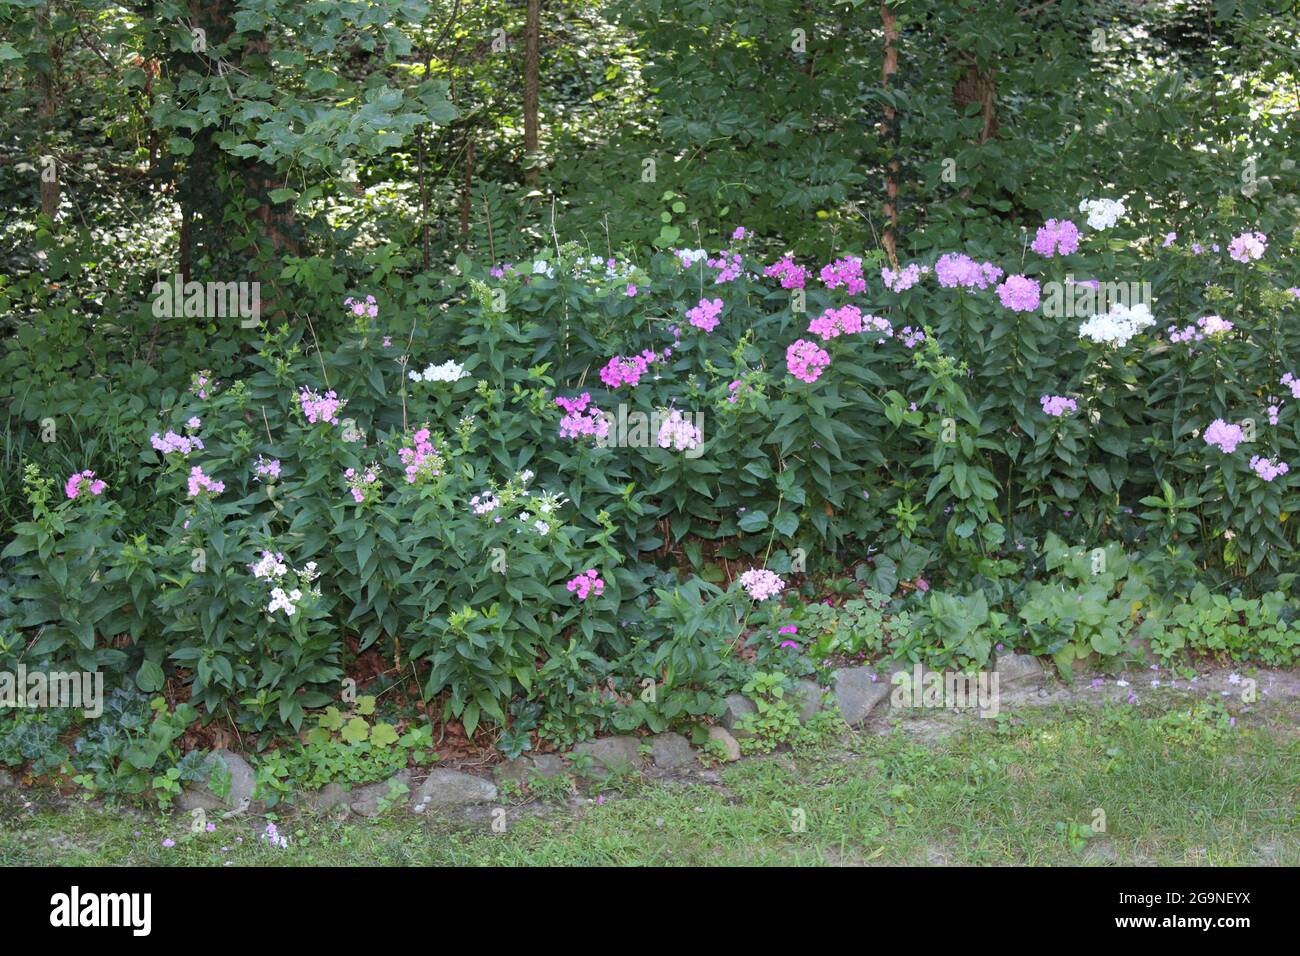 A Group of Different-Colored Garden Phlox in Bloom Stock Photo